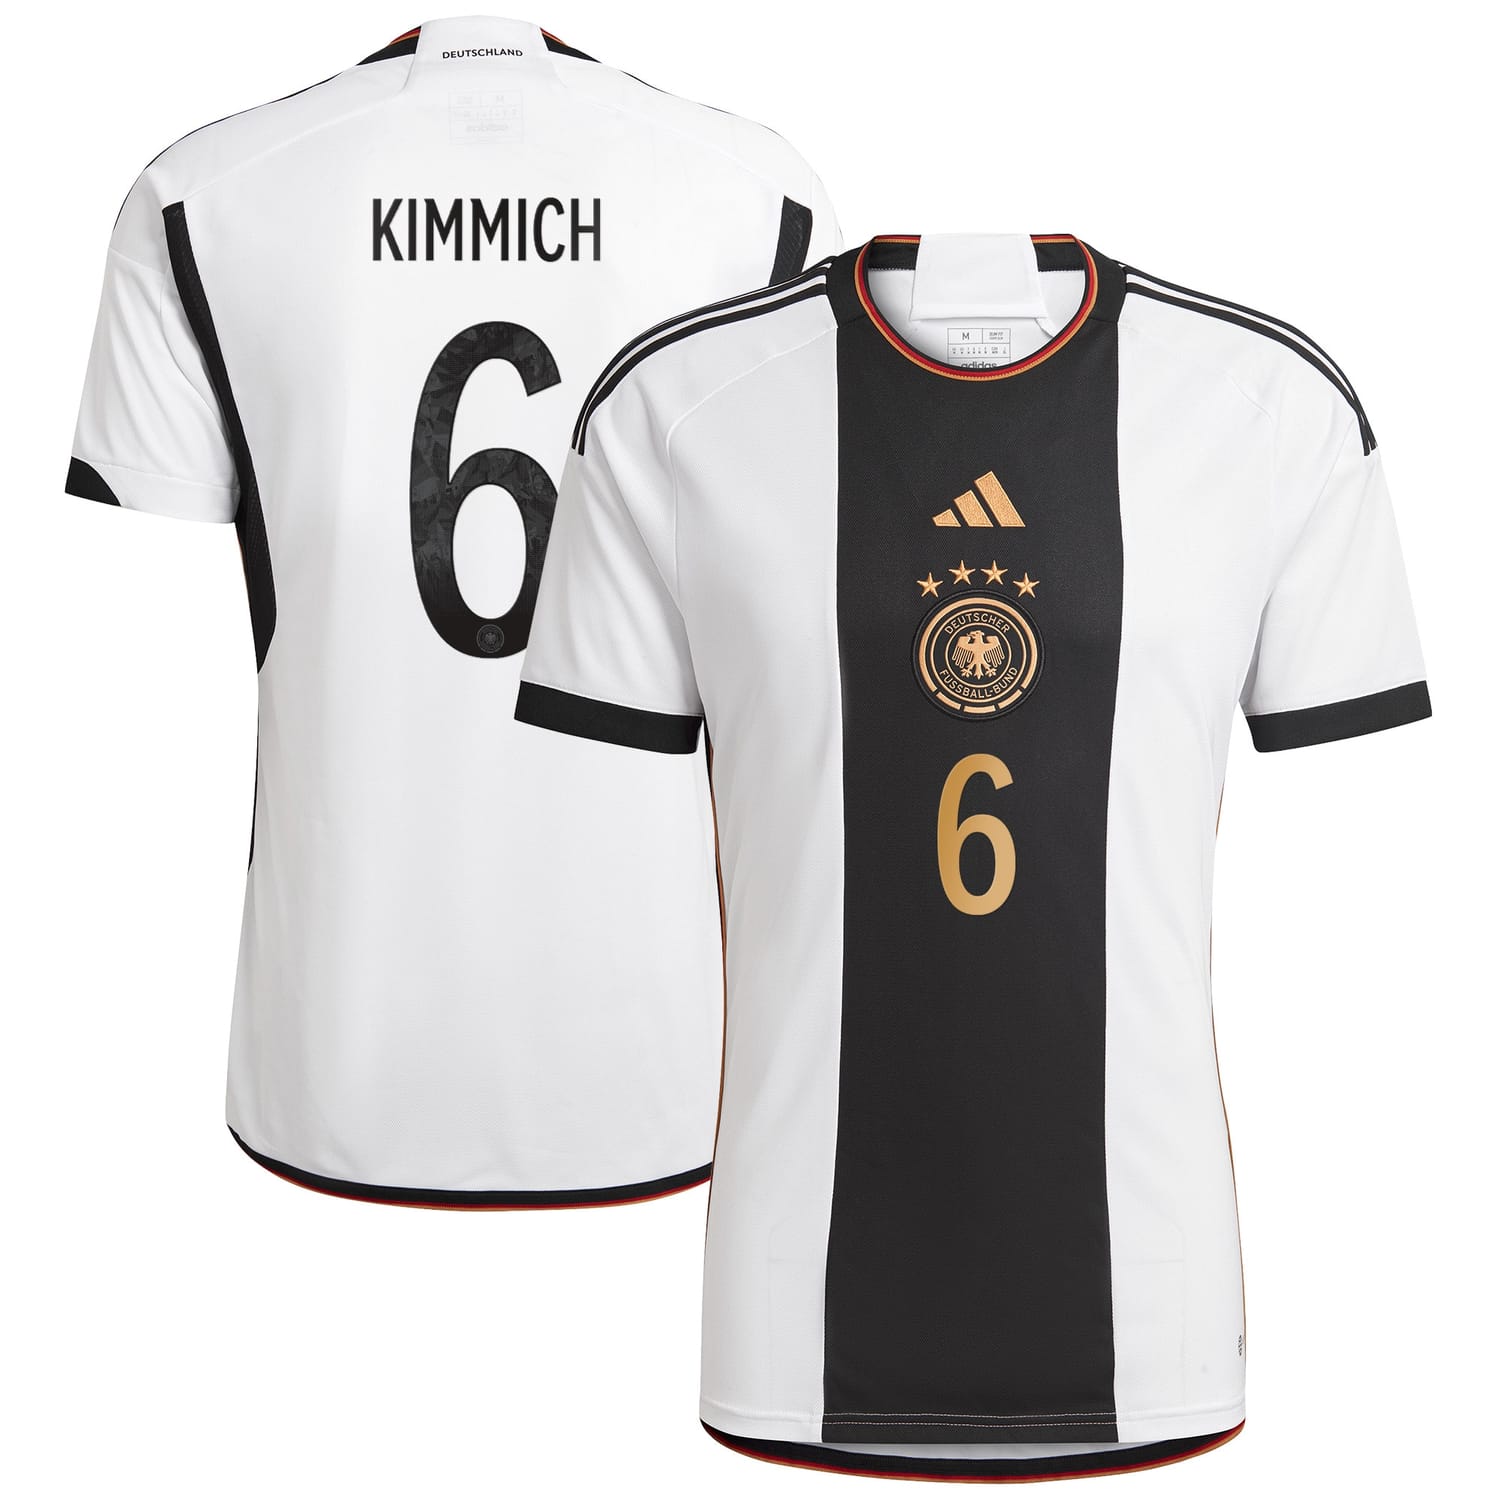 Germany National Team Home Jersey Shirt player Joshua Kimmich 6 printing for Men